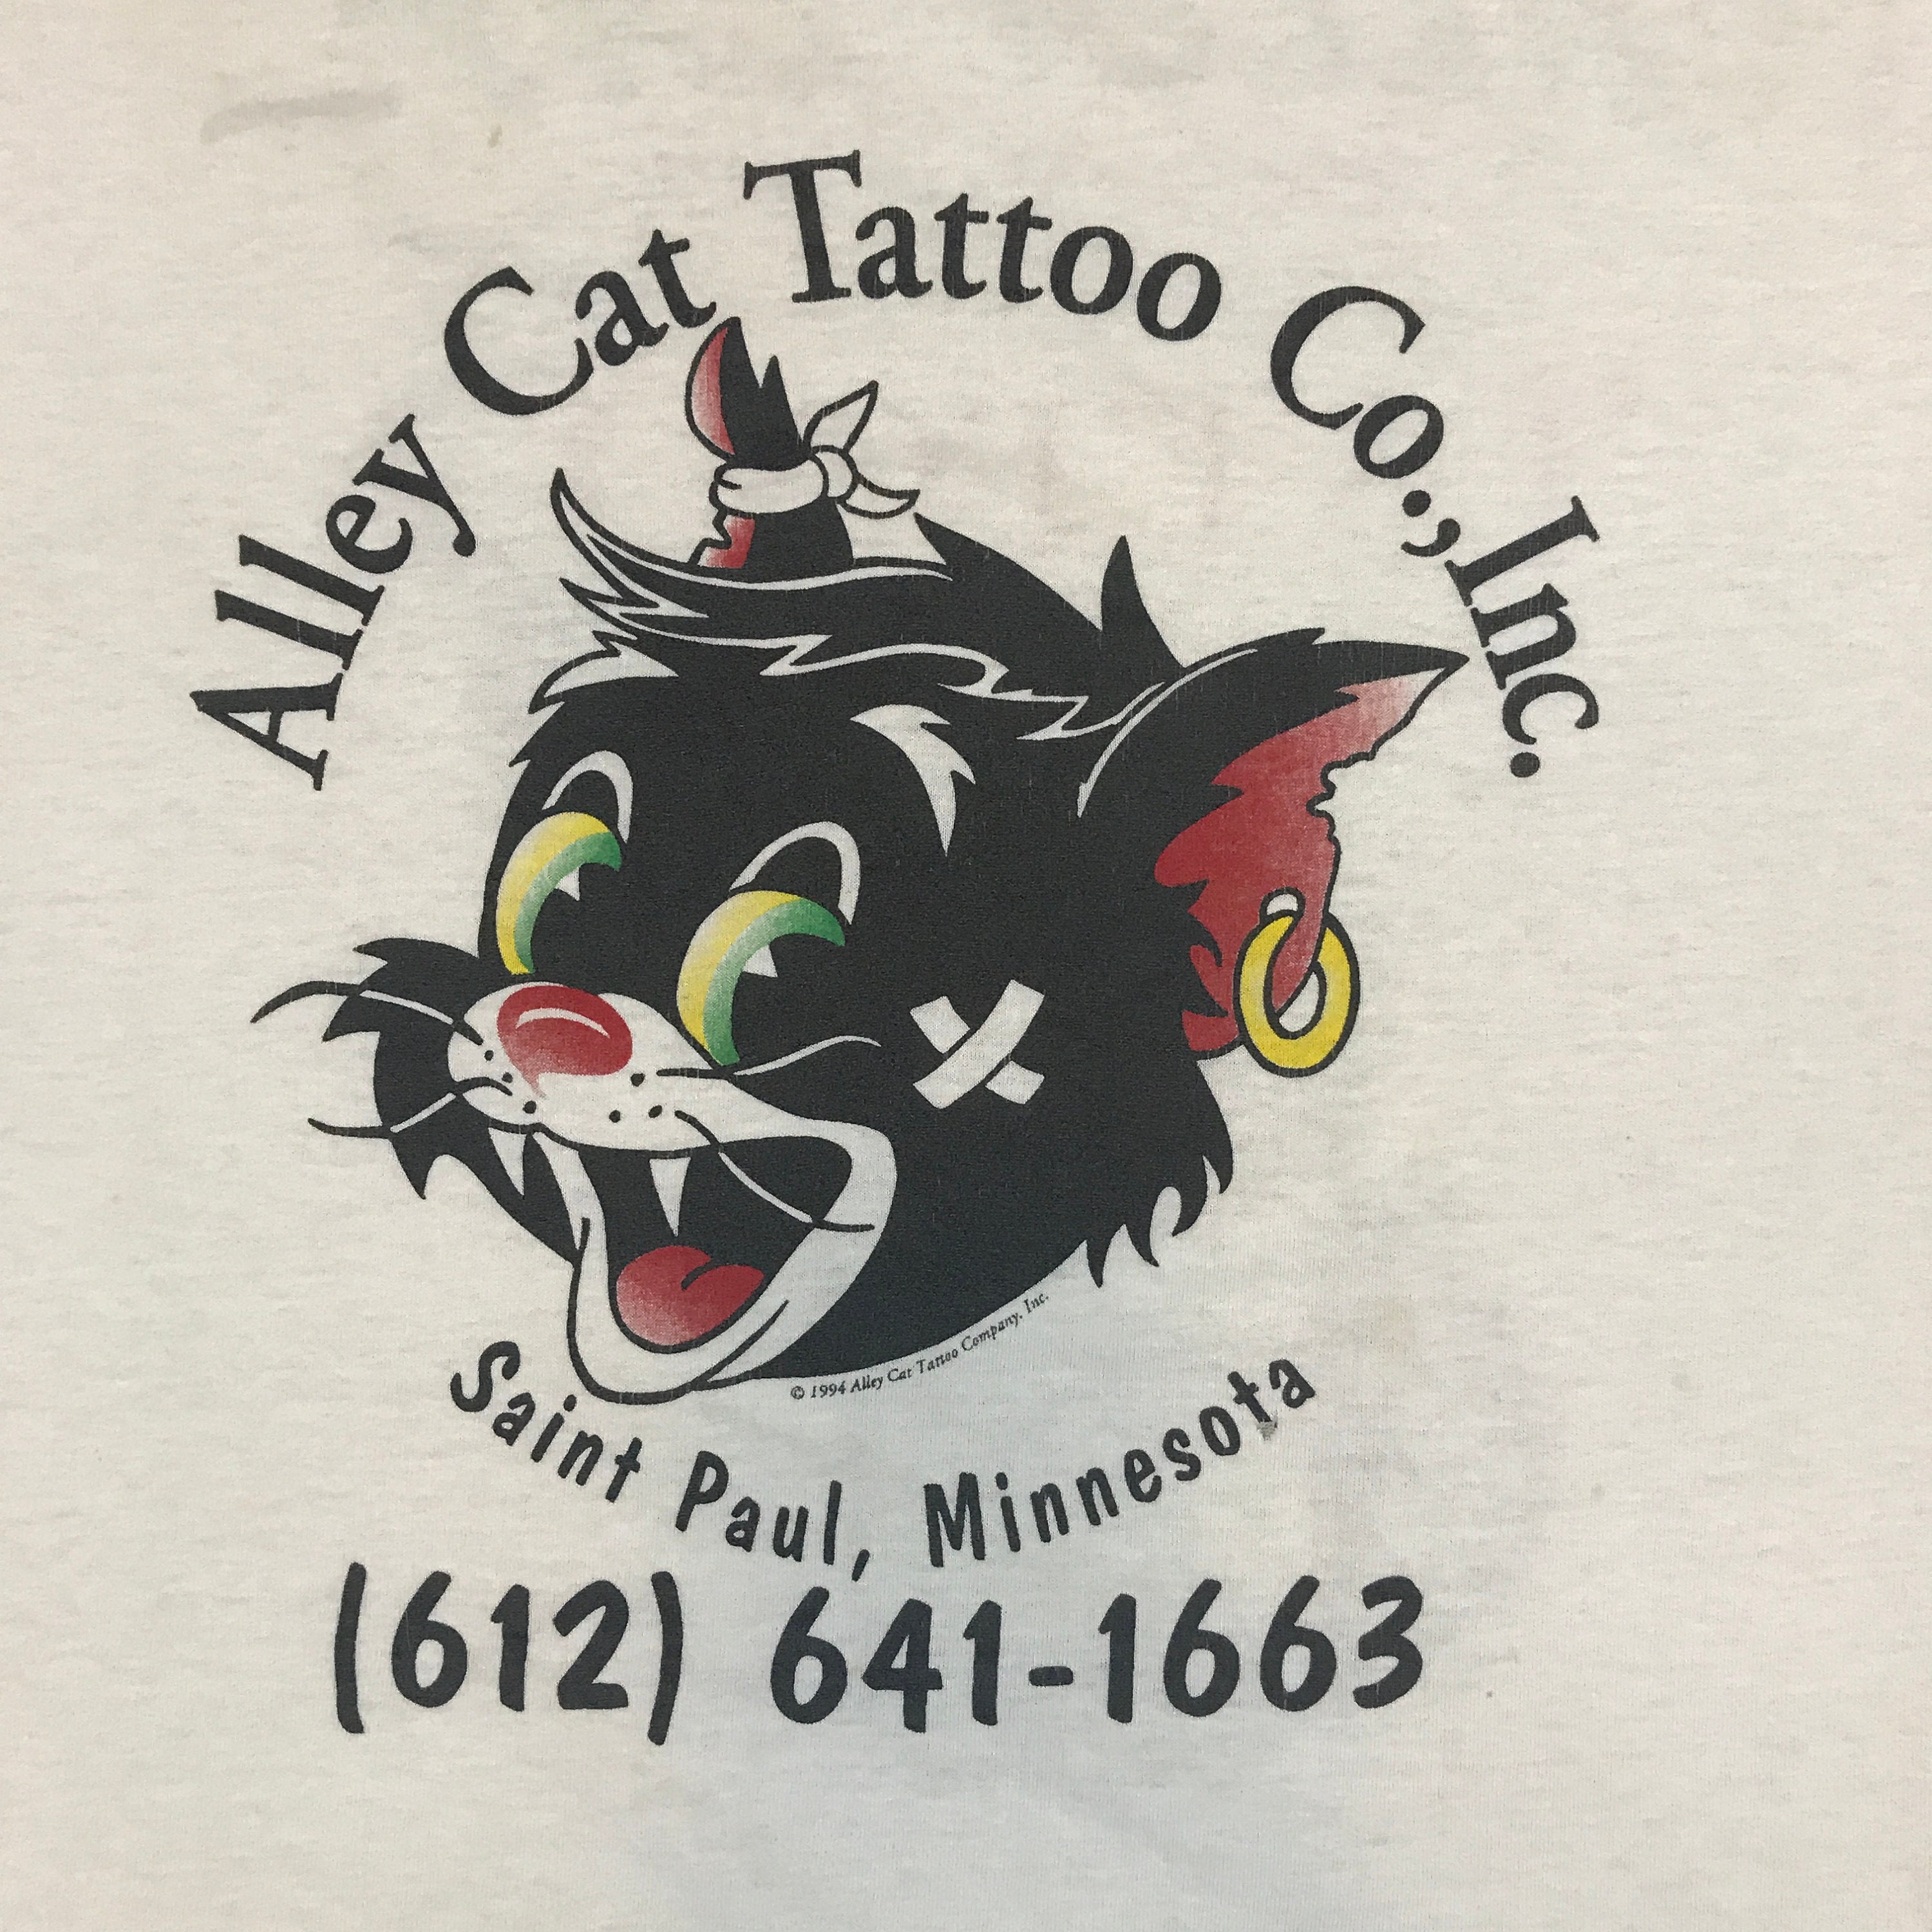 Alley Cat Tattoo Alley Cat By Kelly Nichols On Dribbble Alley cat